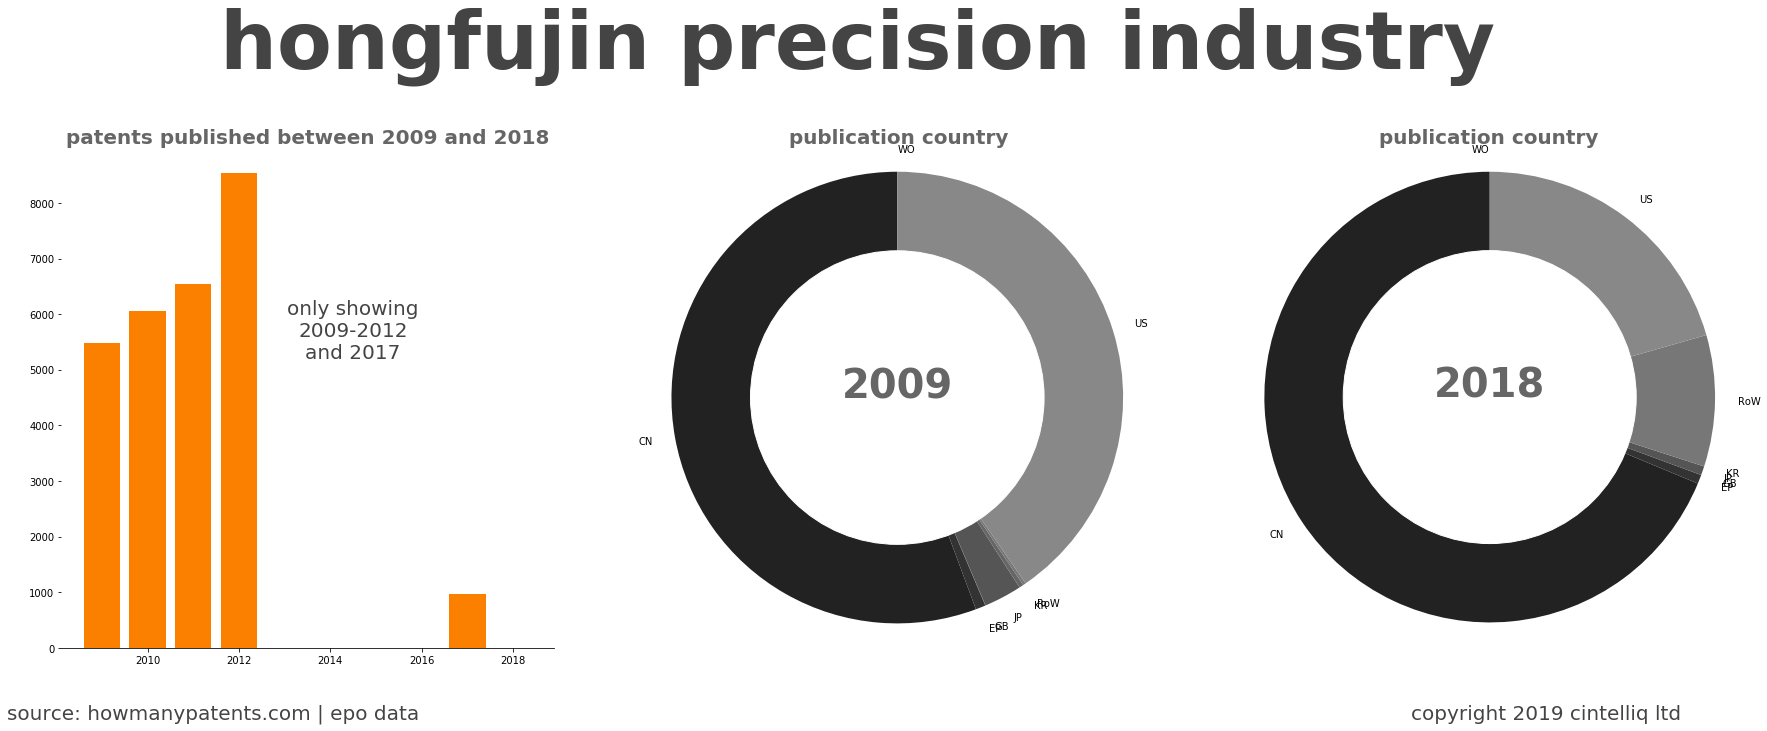 summary of patents for Hongfujin Precision Industry 